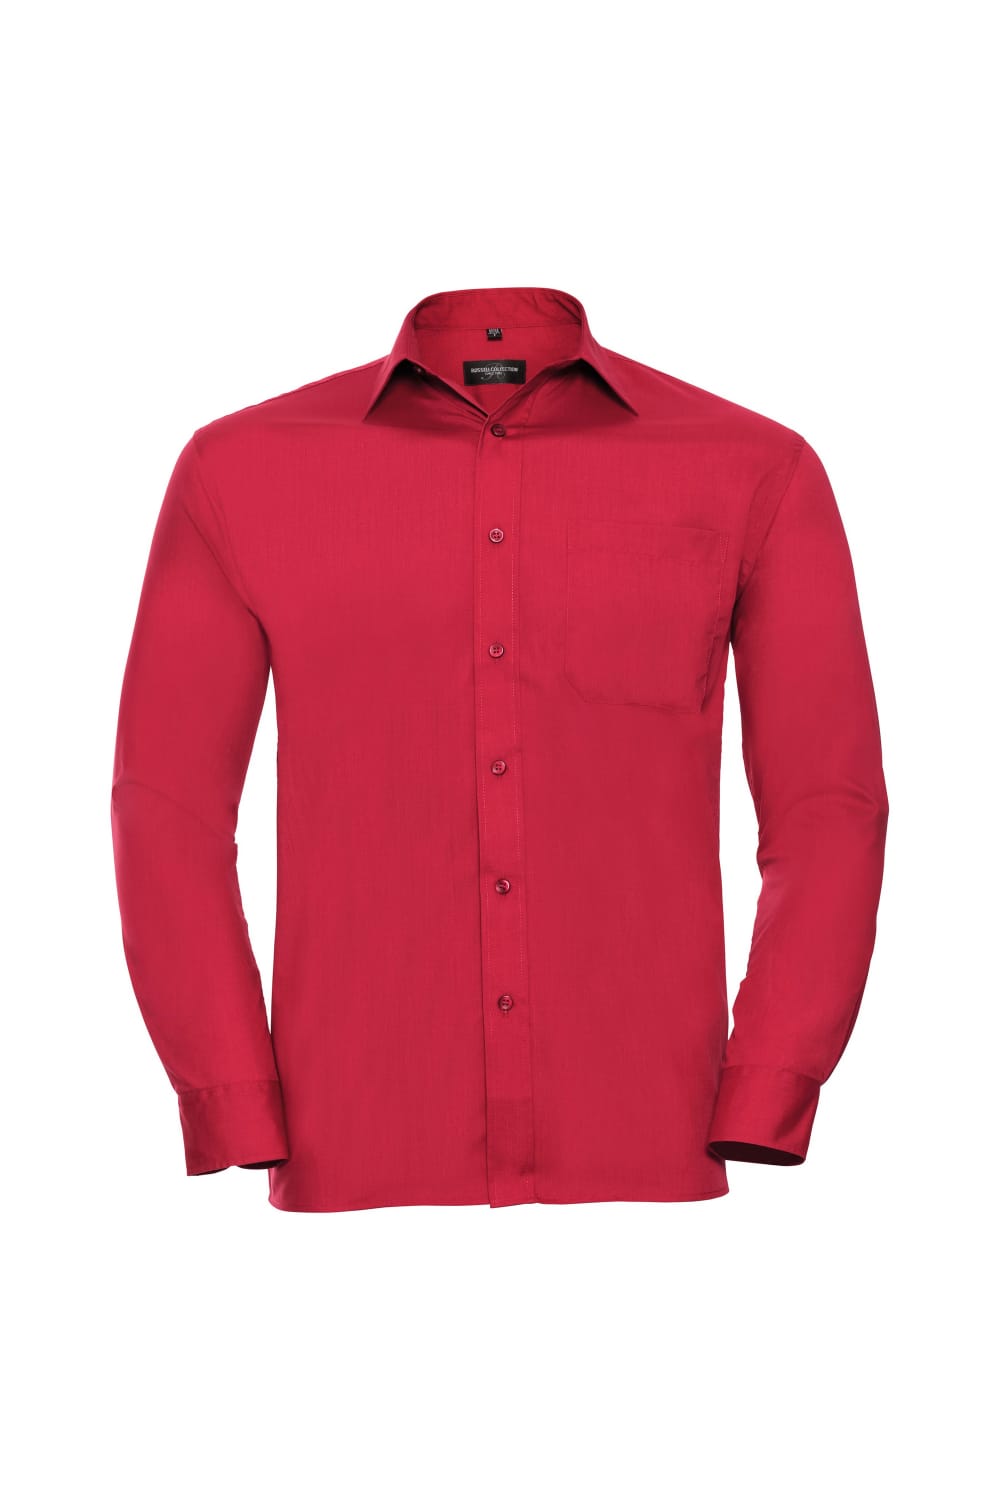 Russell Collection Mens Long Sleeve Easy Care Poplin Shirt